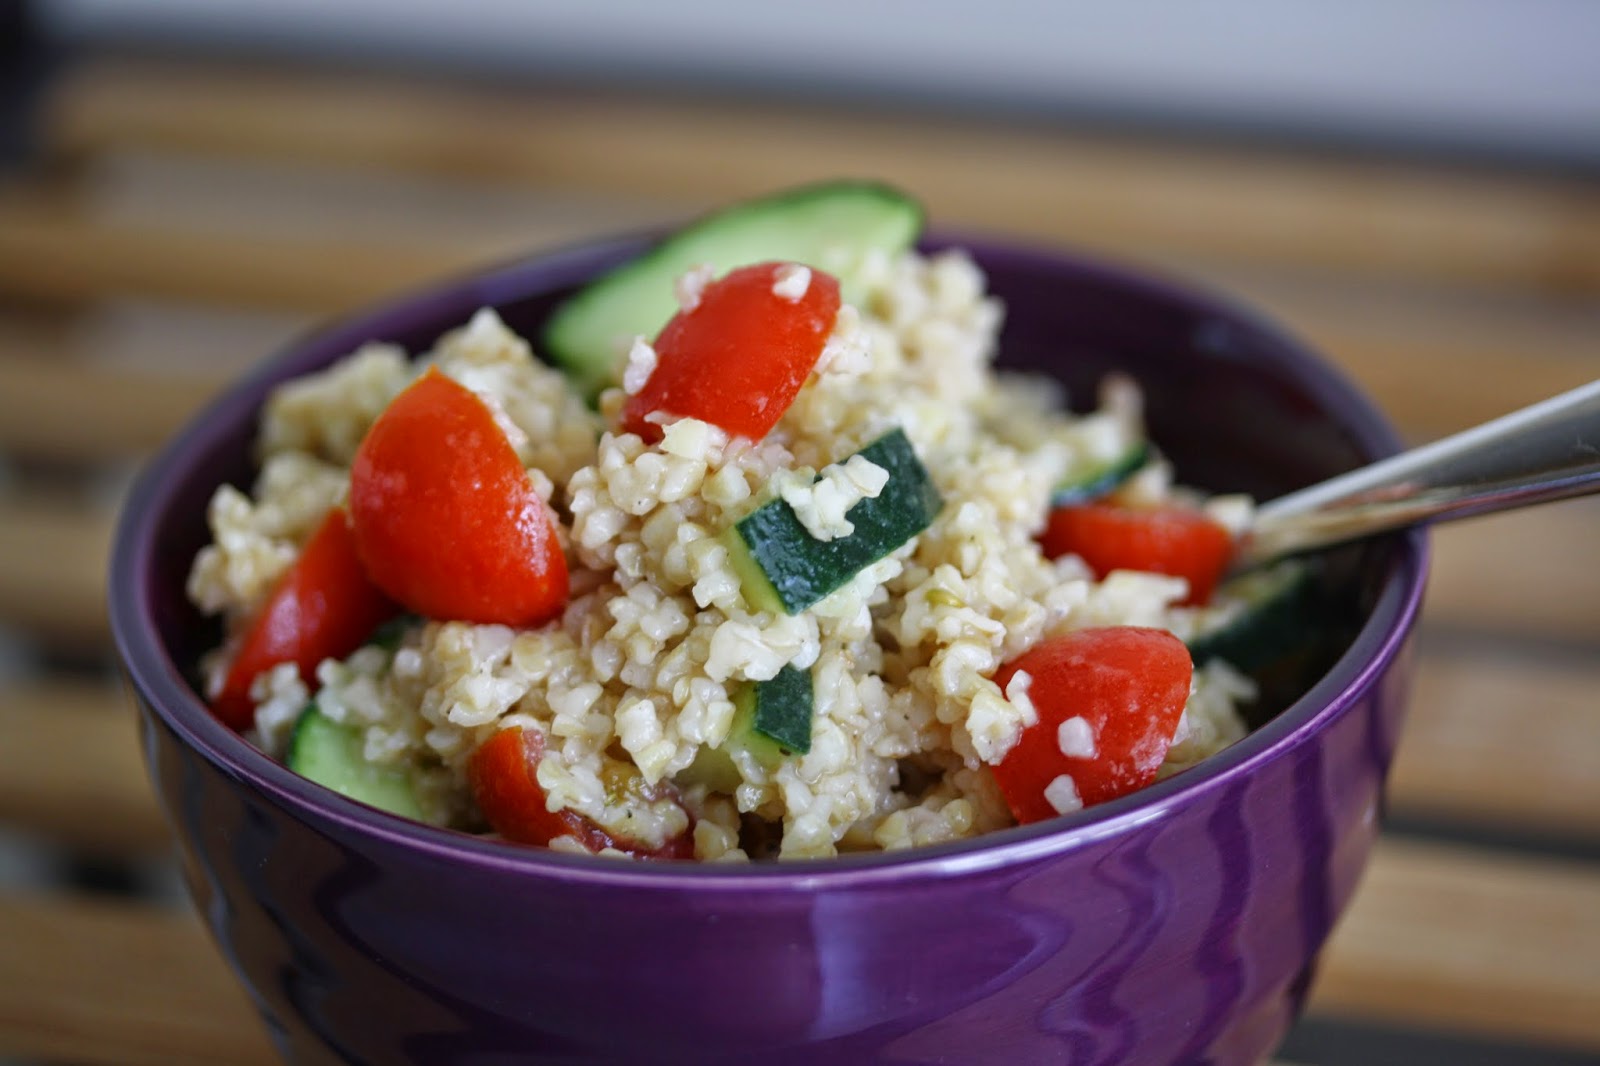 Hot Dinner Happy Home: Bulgur Salad with Tomatoes and Cucumbers